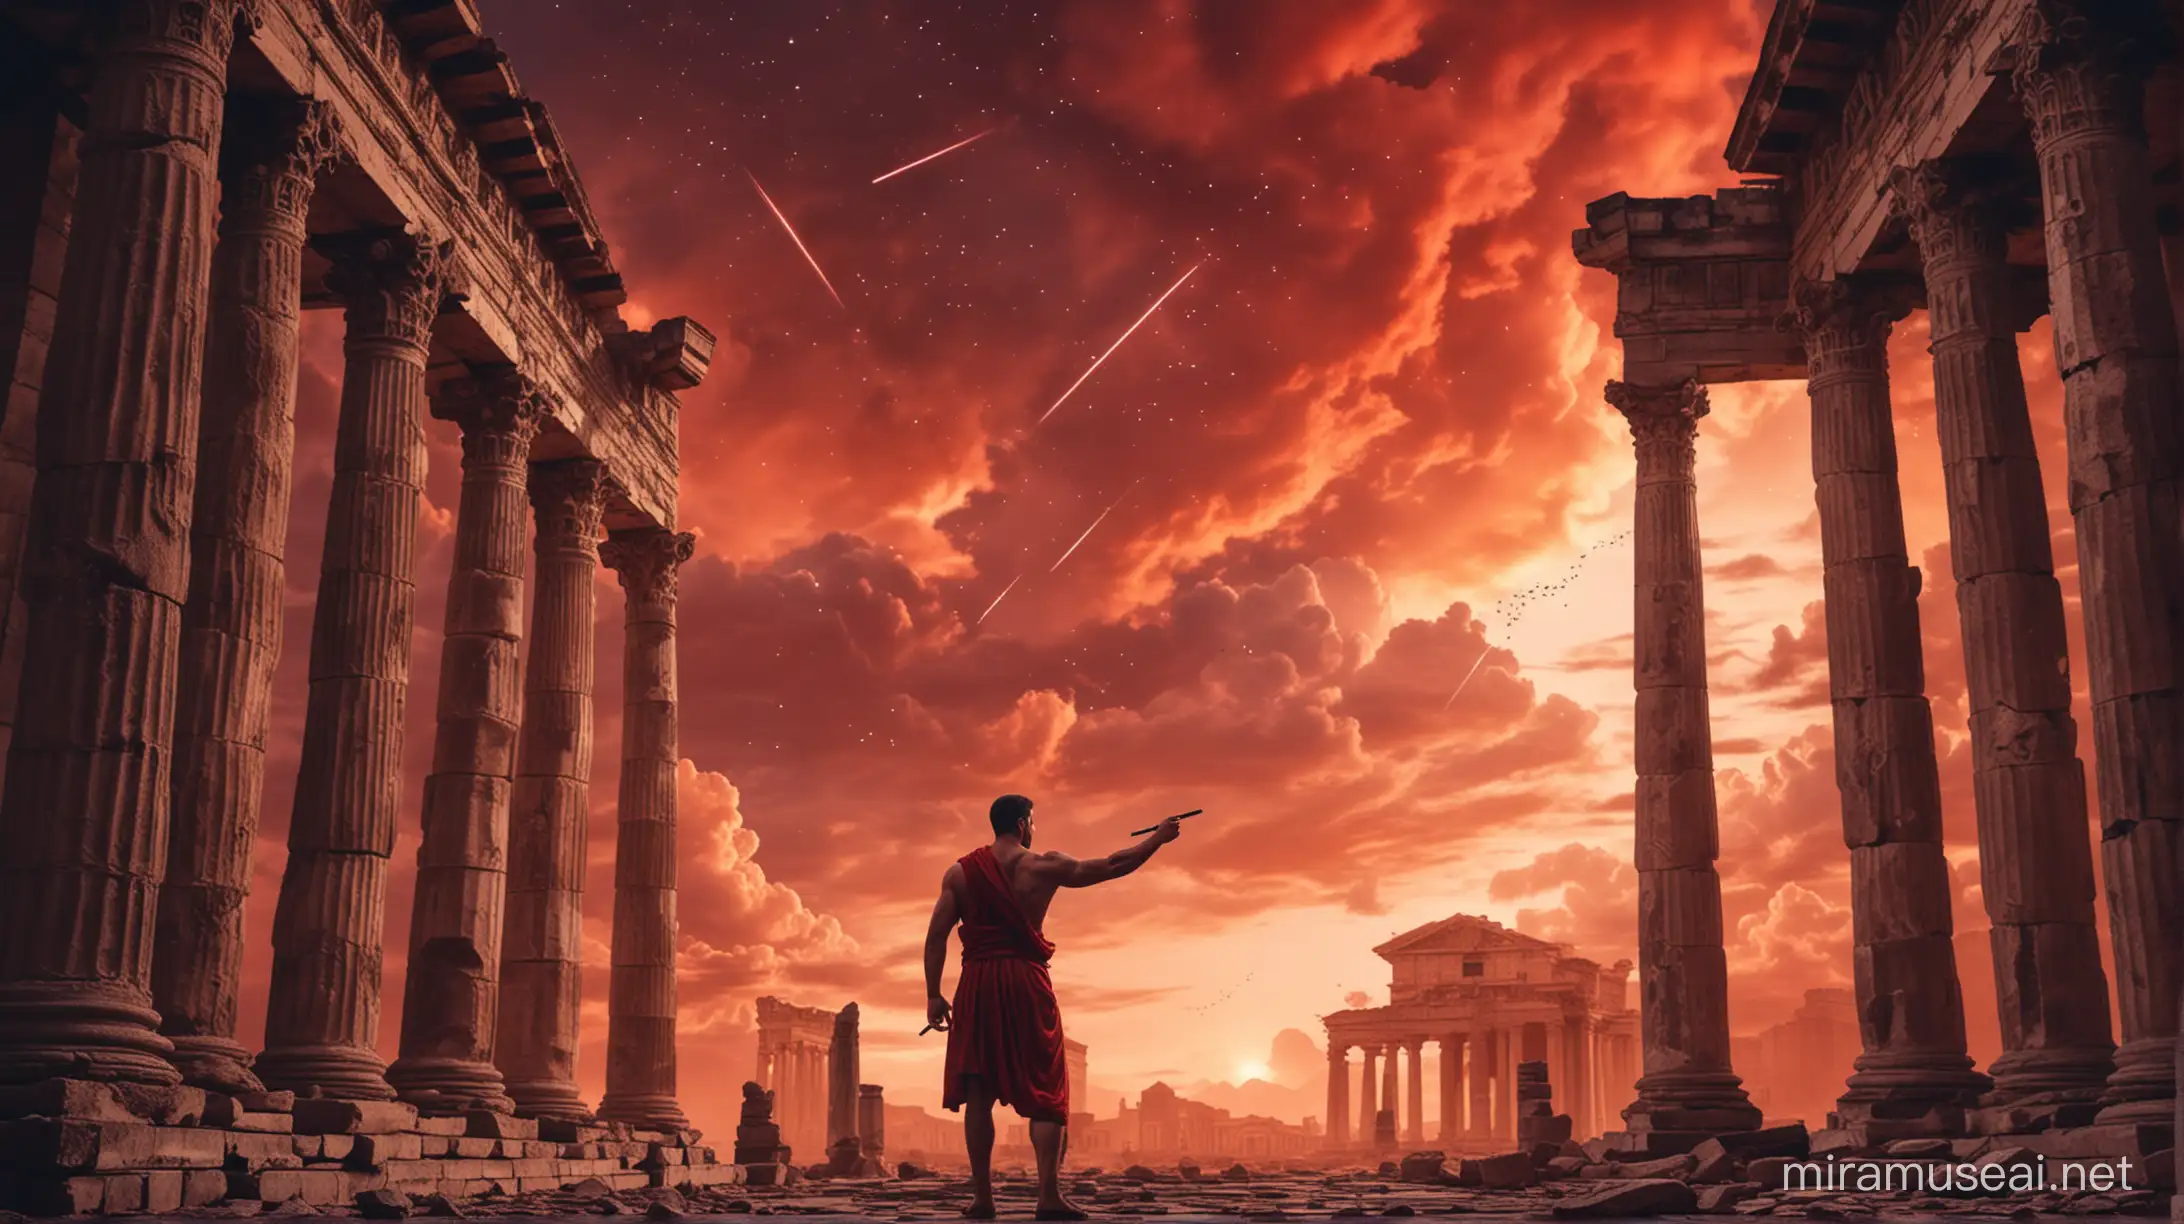 Stoic Muscular Figure Amidst Ancient Columns Under Red Clouds